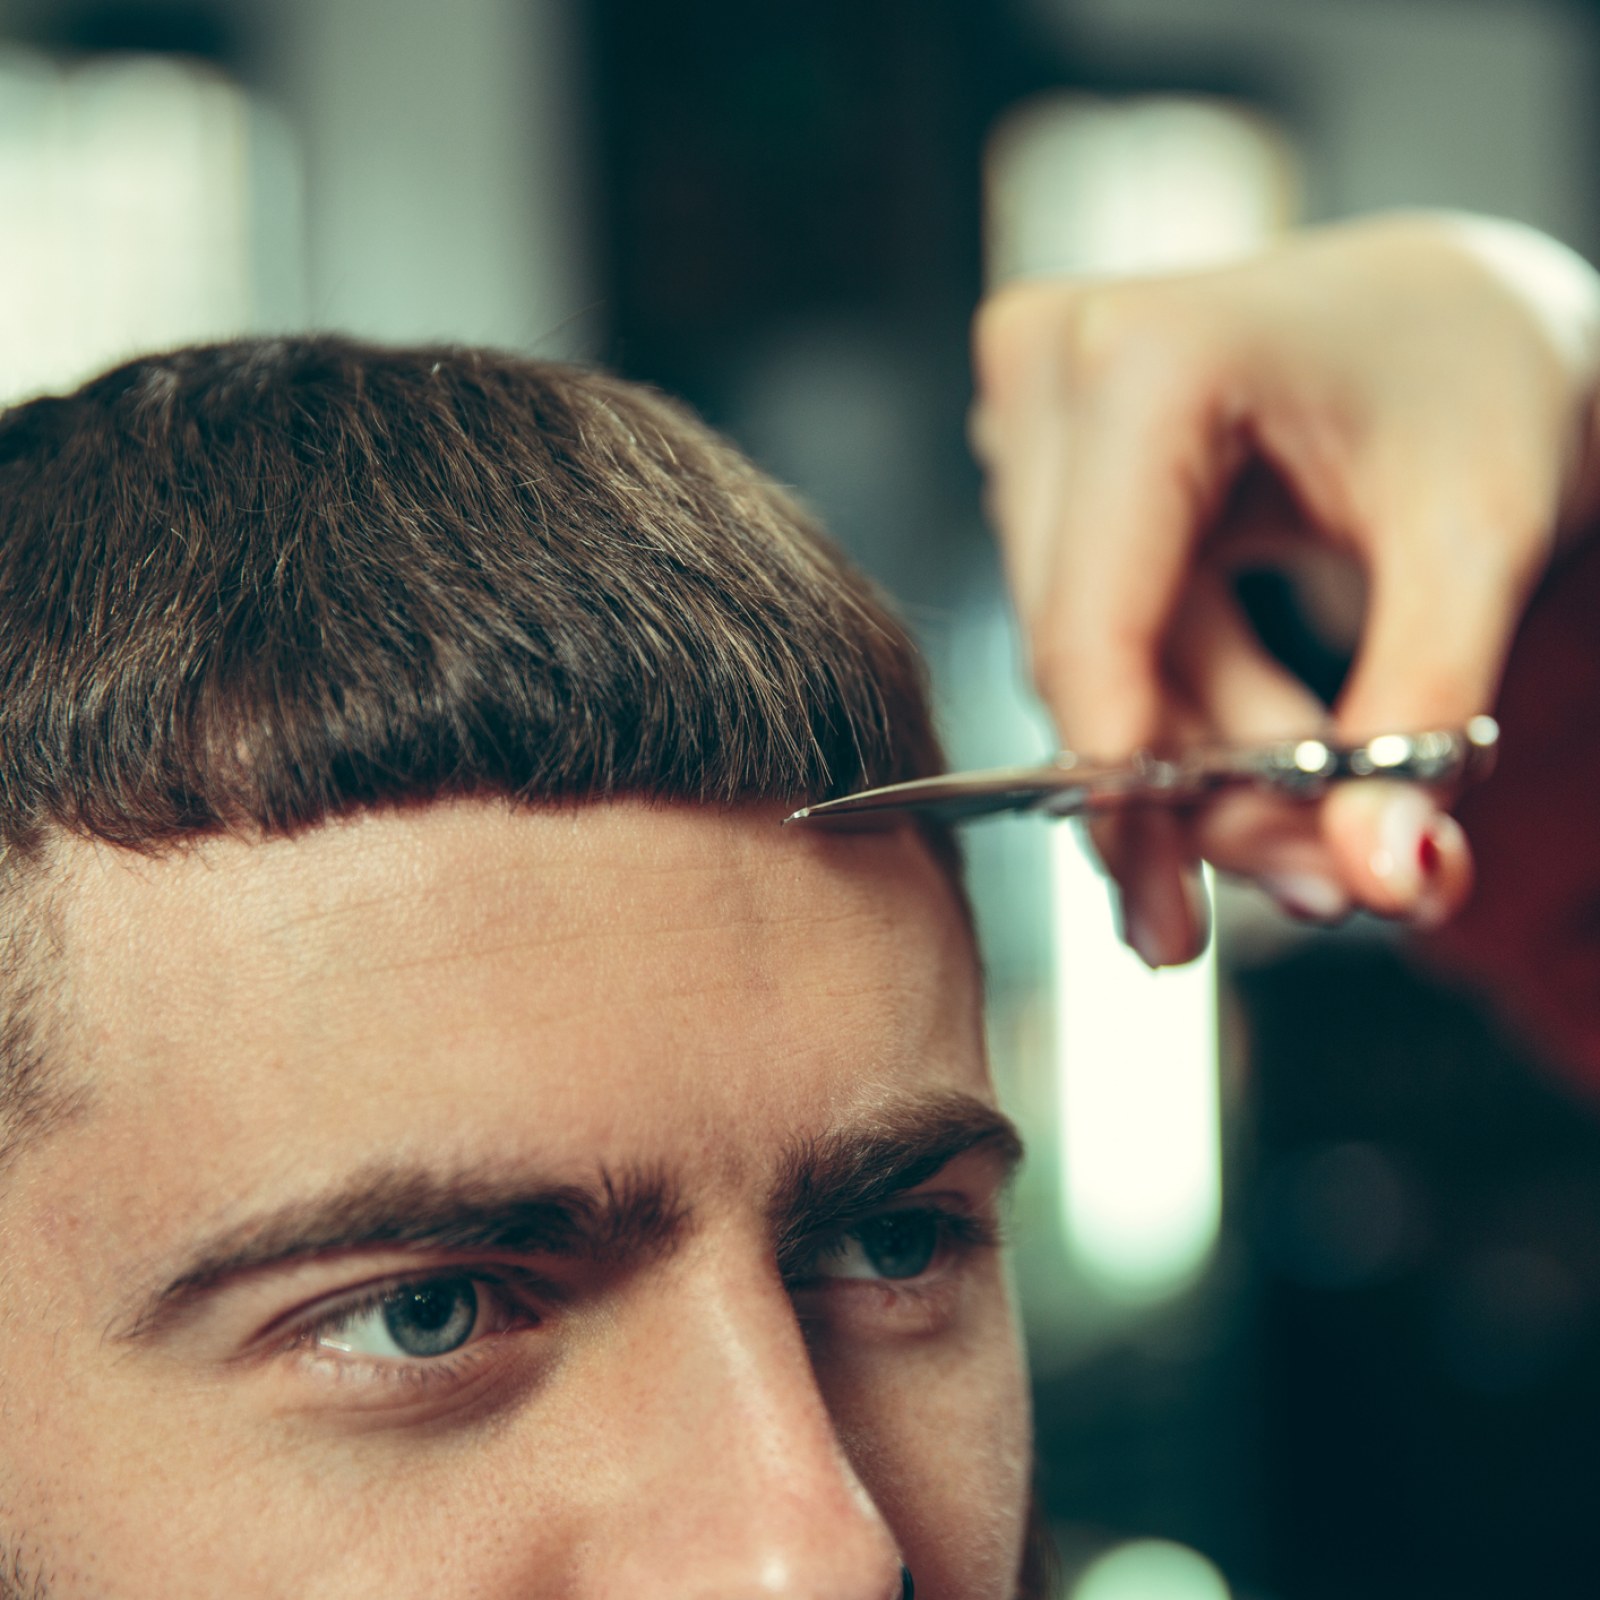 How to Cut Men's Hair at Home During the Coronavirus Outbreak